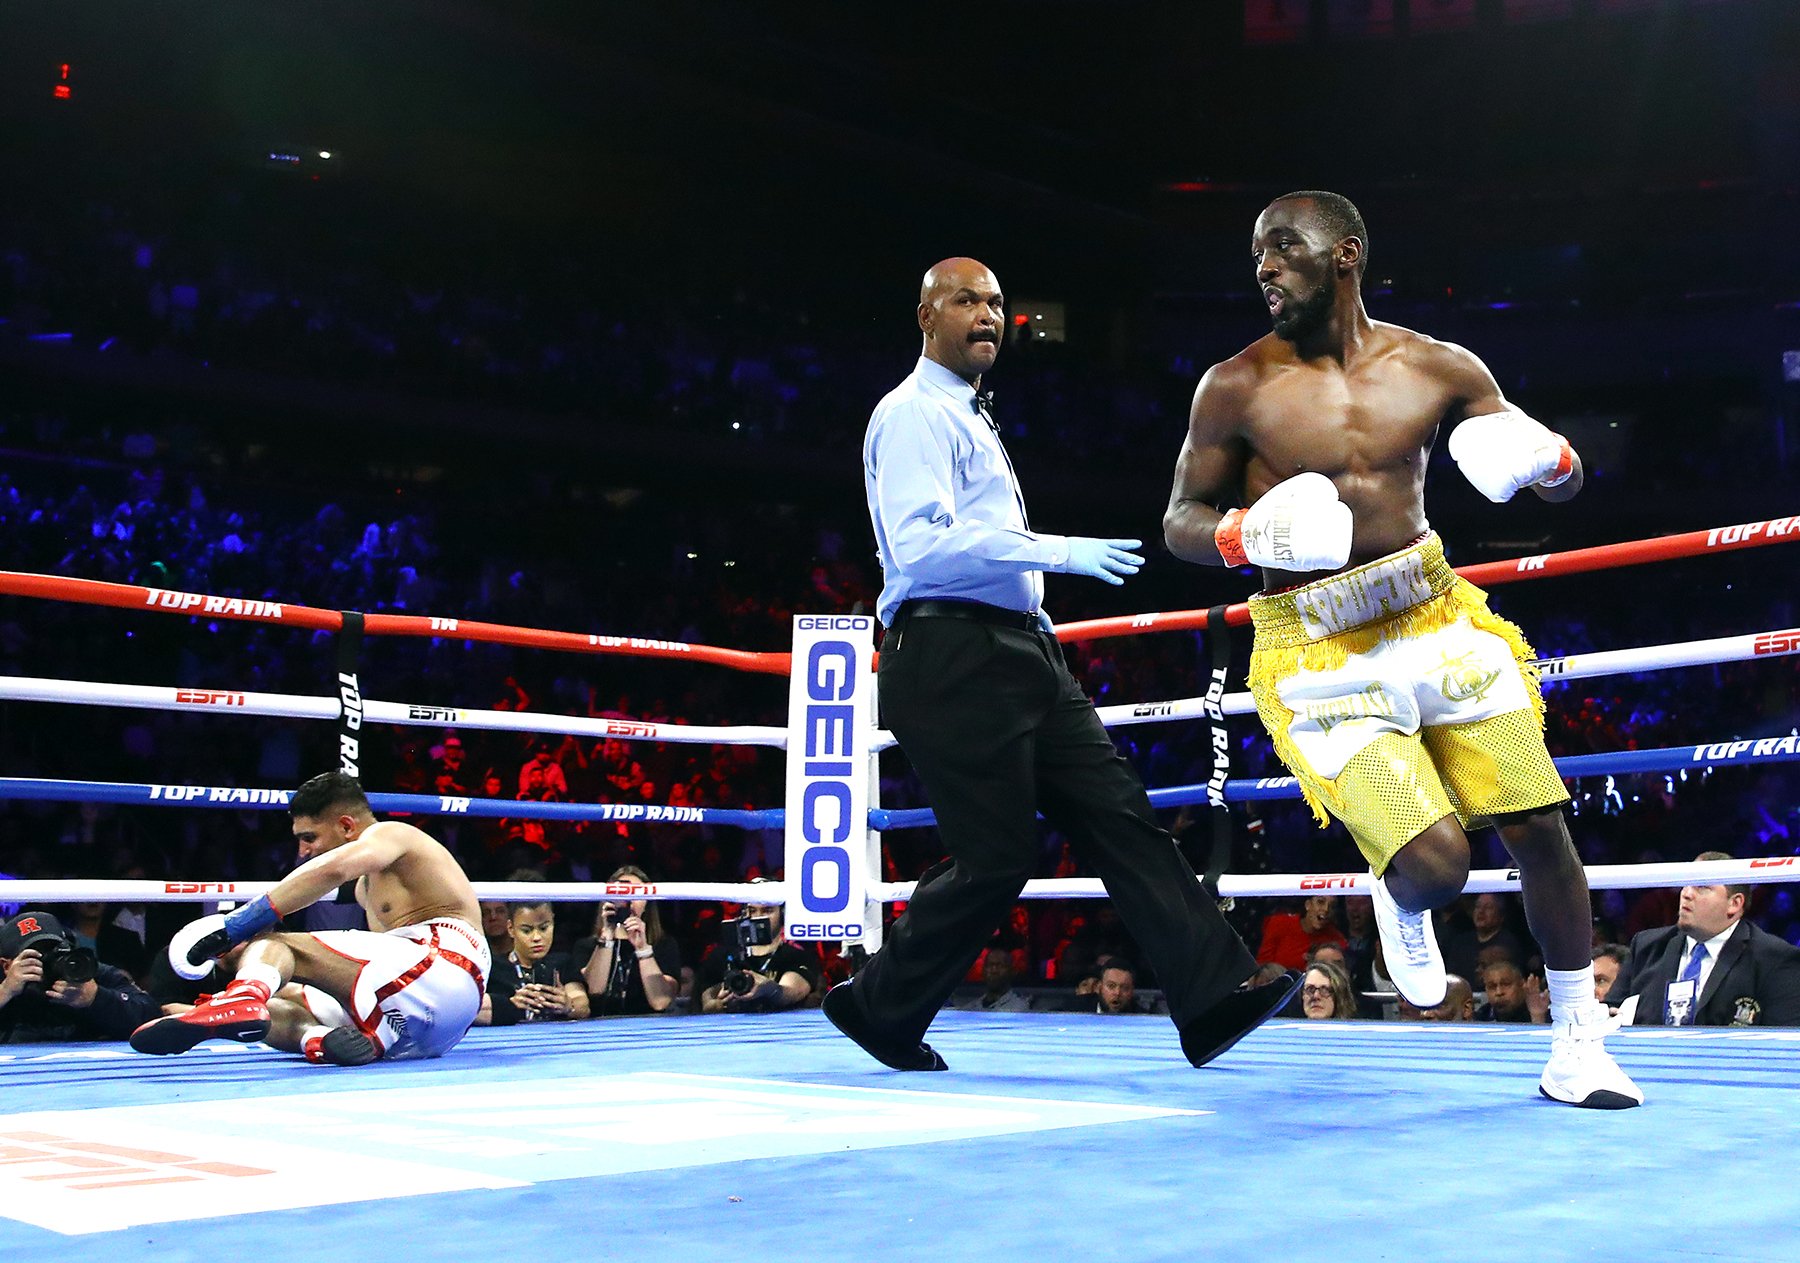 Terence Crawford punishes Amir Khan, but fight ends on disappointing low blow TKO